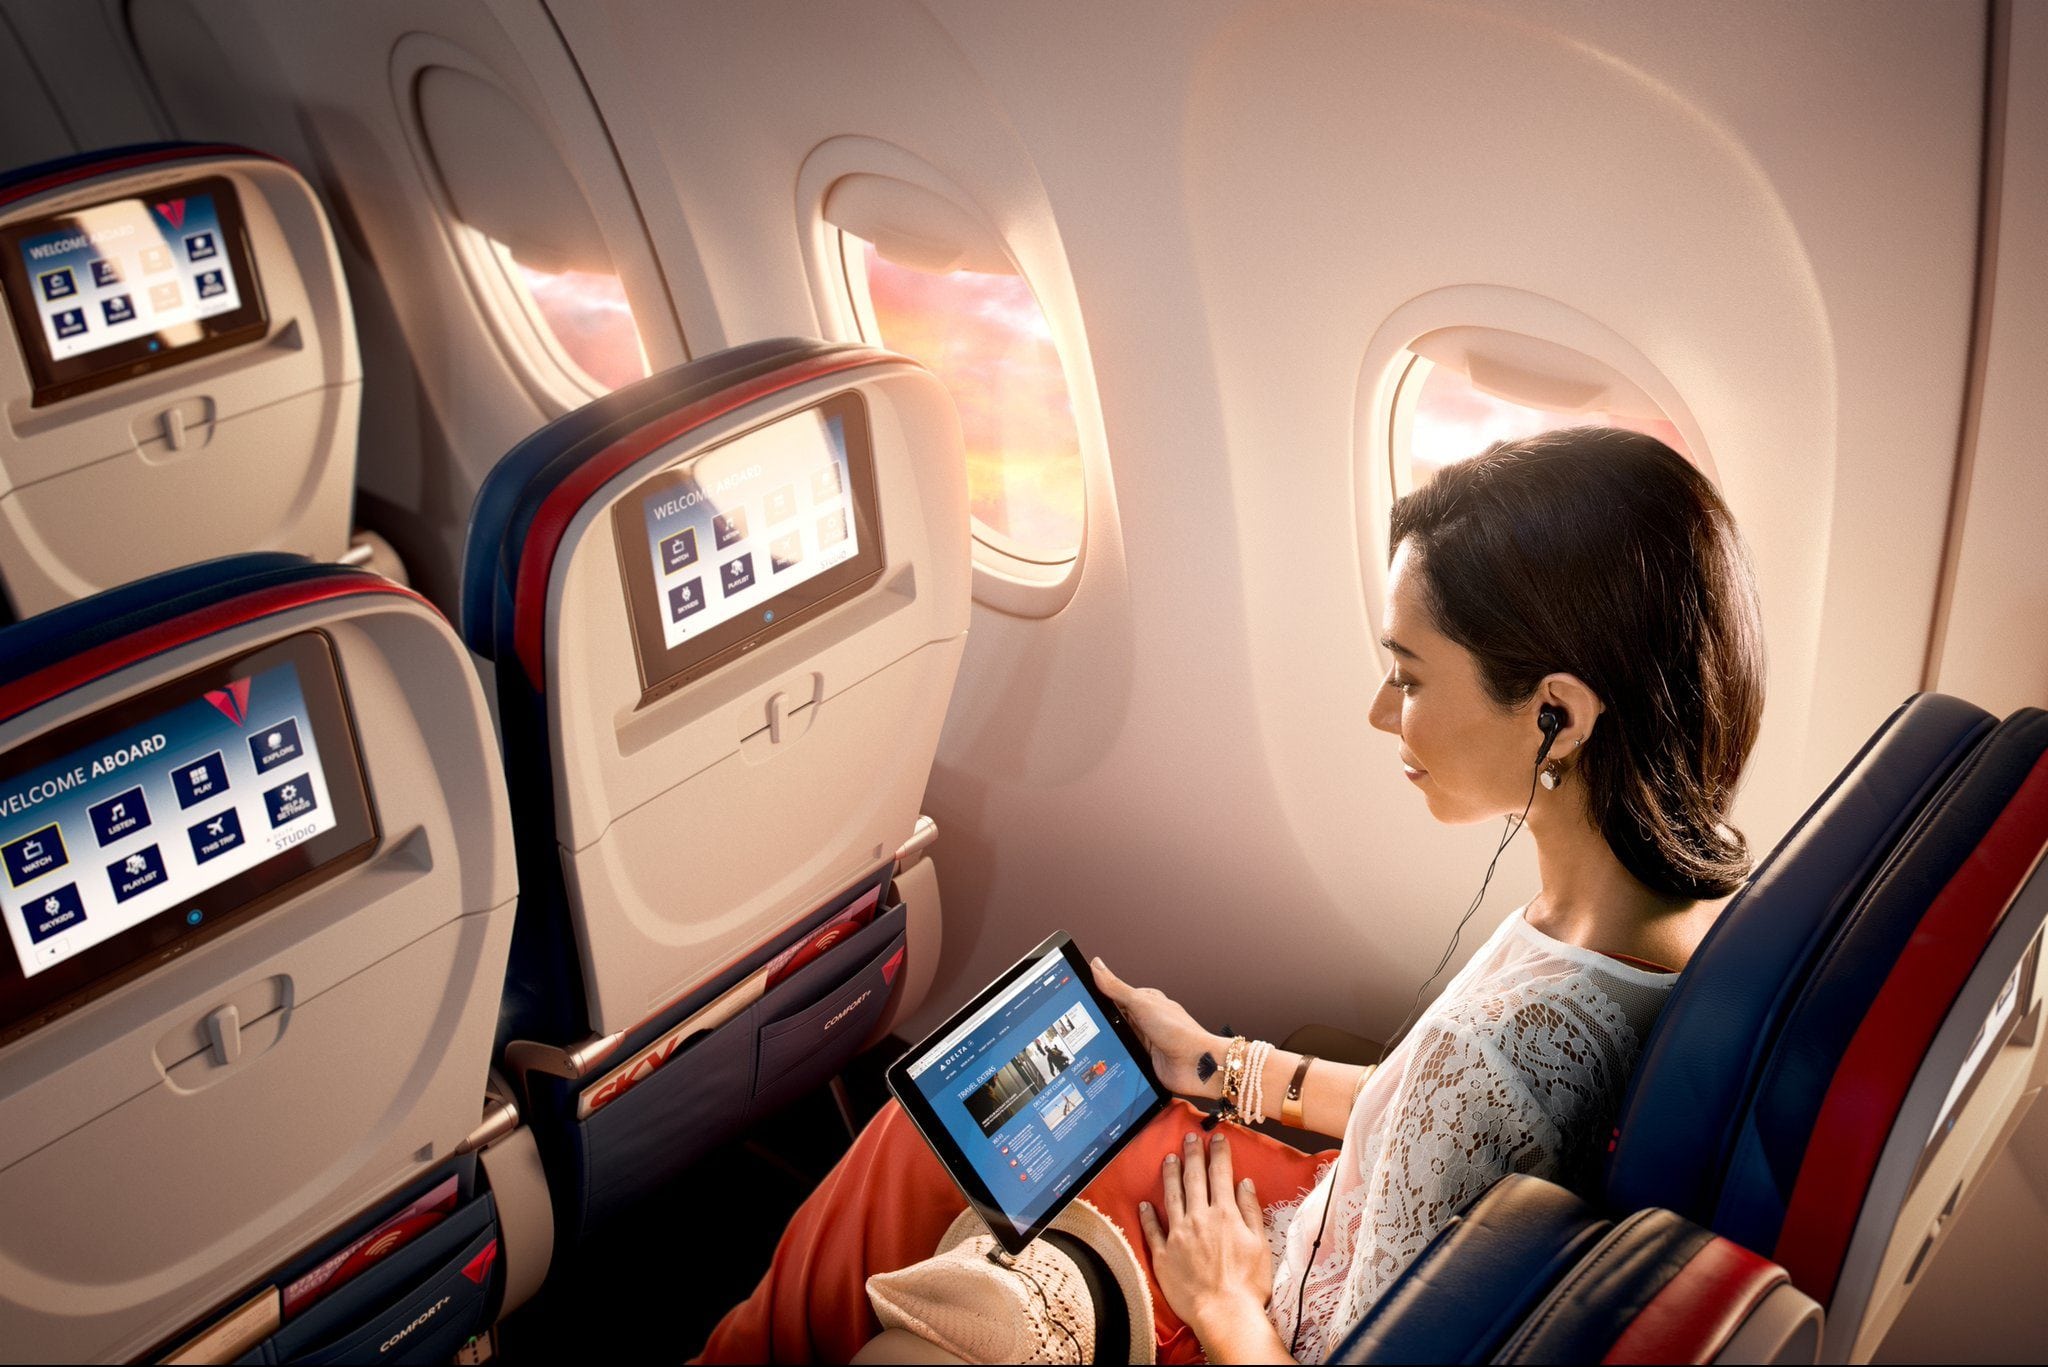 Delta's InFlight Entertainment Will Soon Be Free for All Passengers